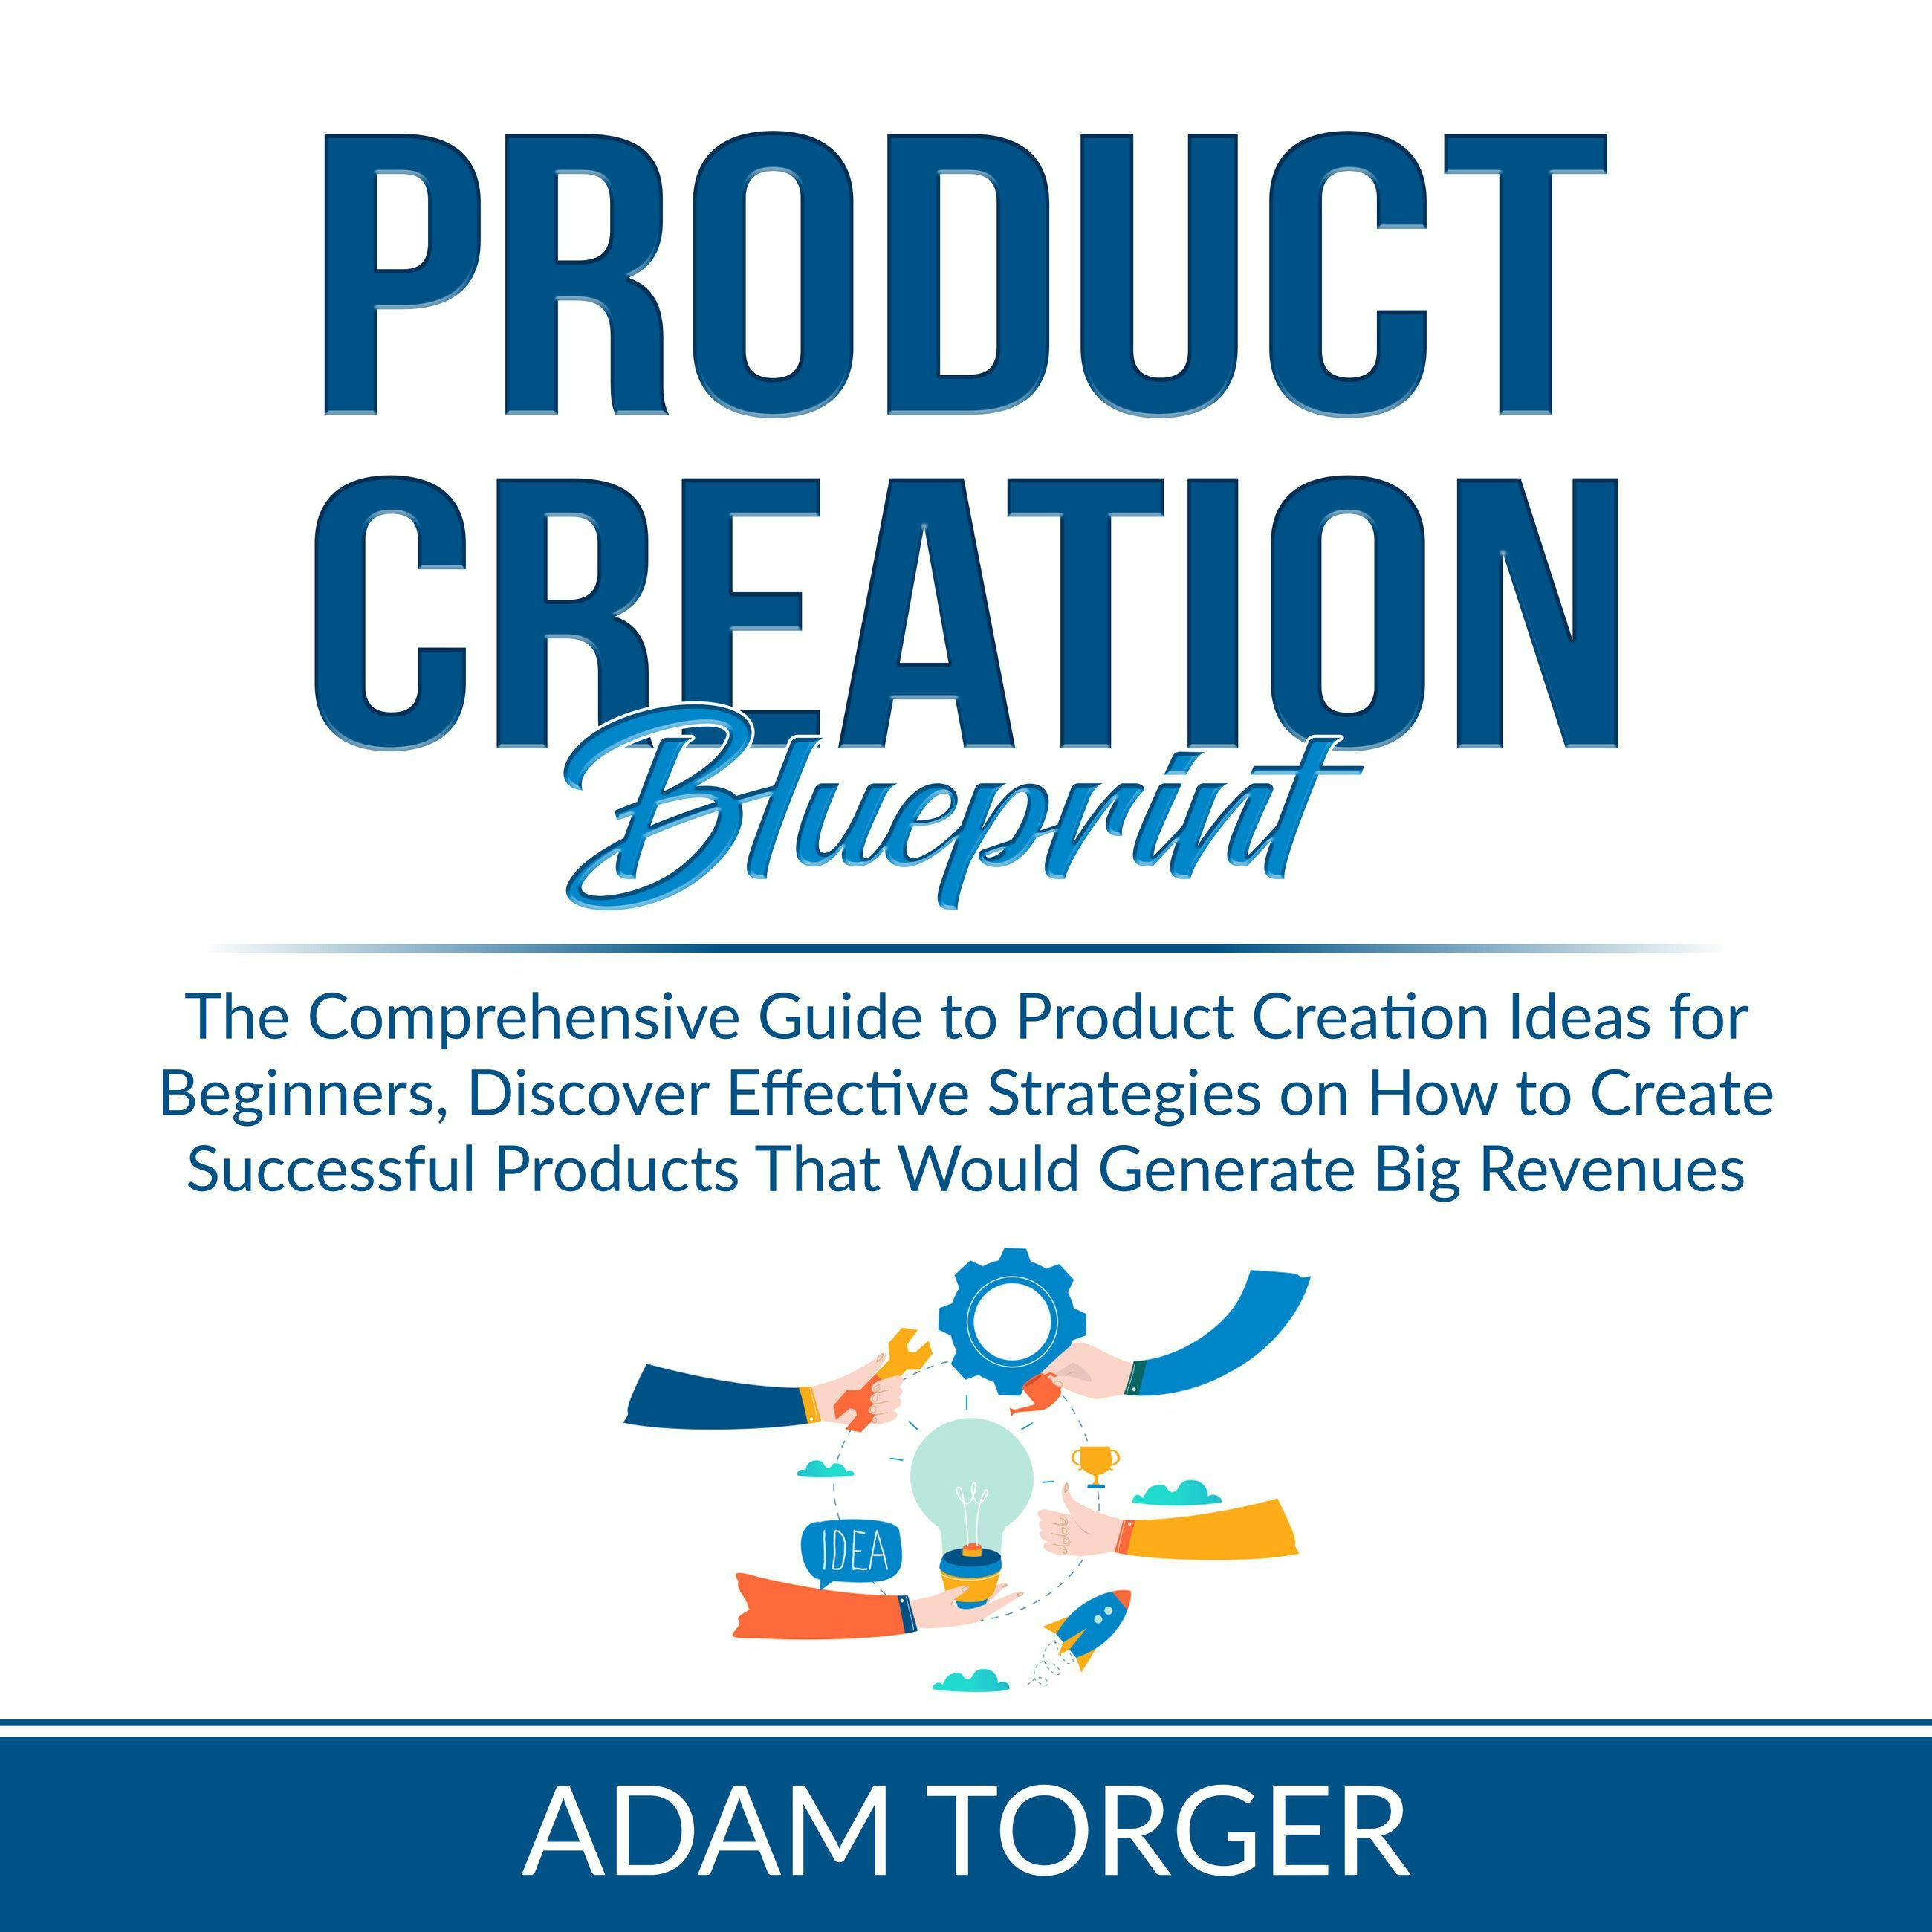 Product Creation Blueprint: The Comprehensive Guide to Product Creation Ideas for Beginners, Discover Effective Strategies on How to Create Successful Products That Would Generate Big Revenues - Adam Torger